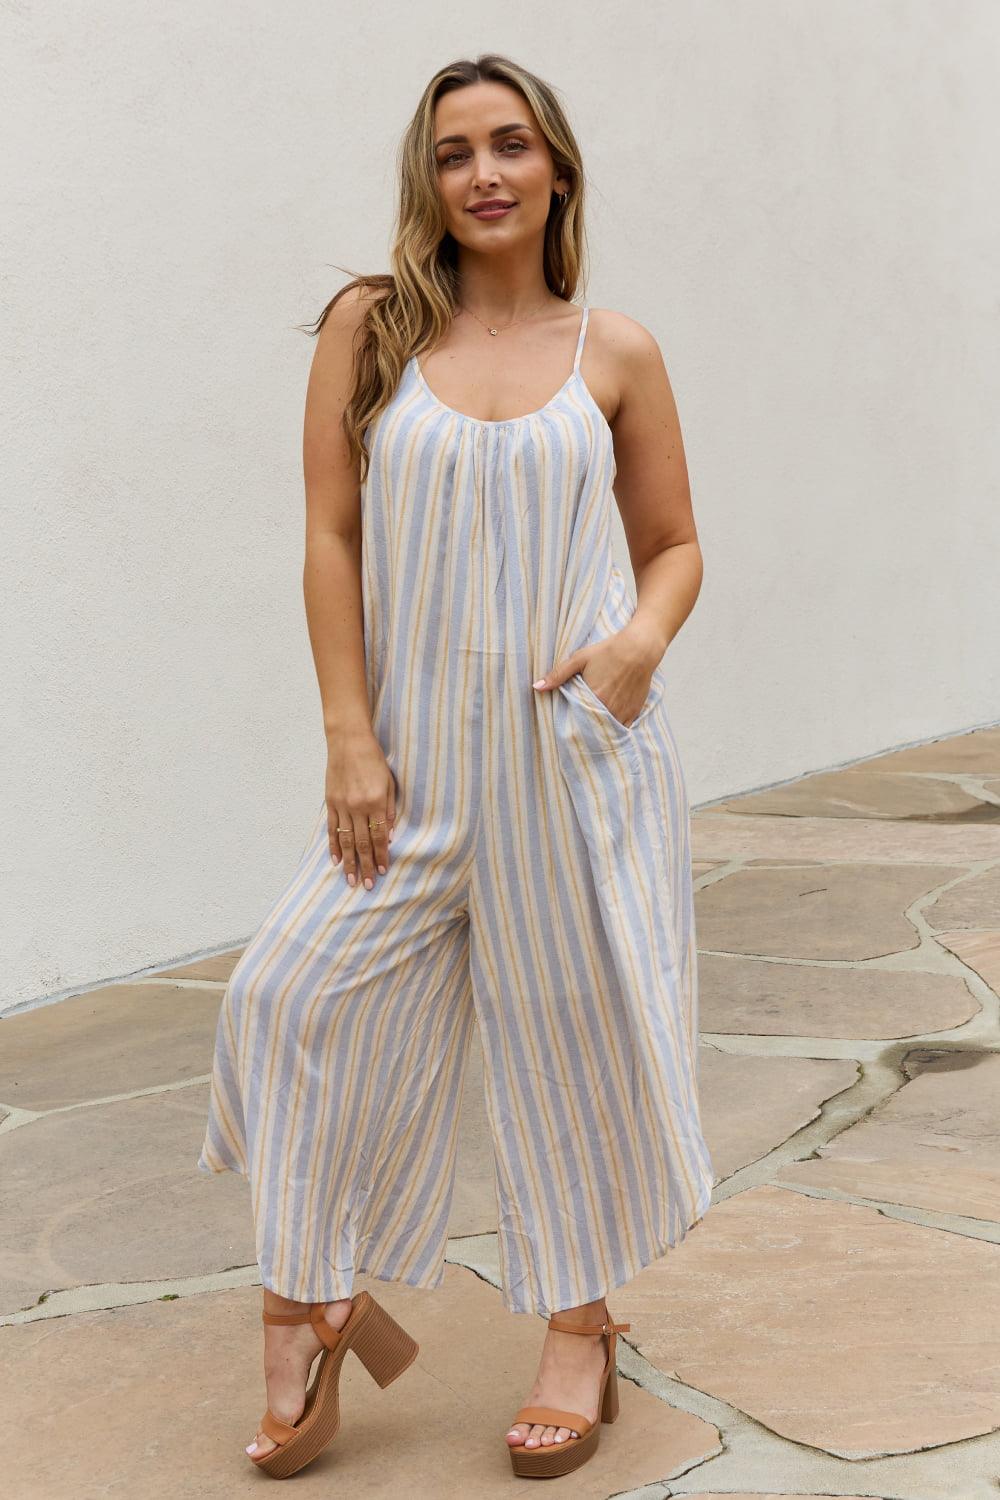 HEYSON Full Size Multi Colored Striped Jumpsuit with Pockets - AMIClubwear